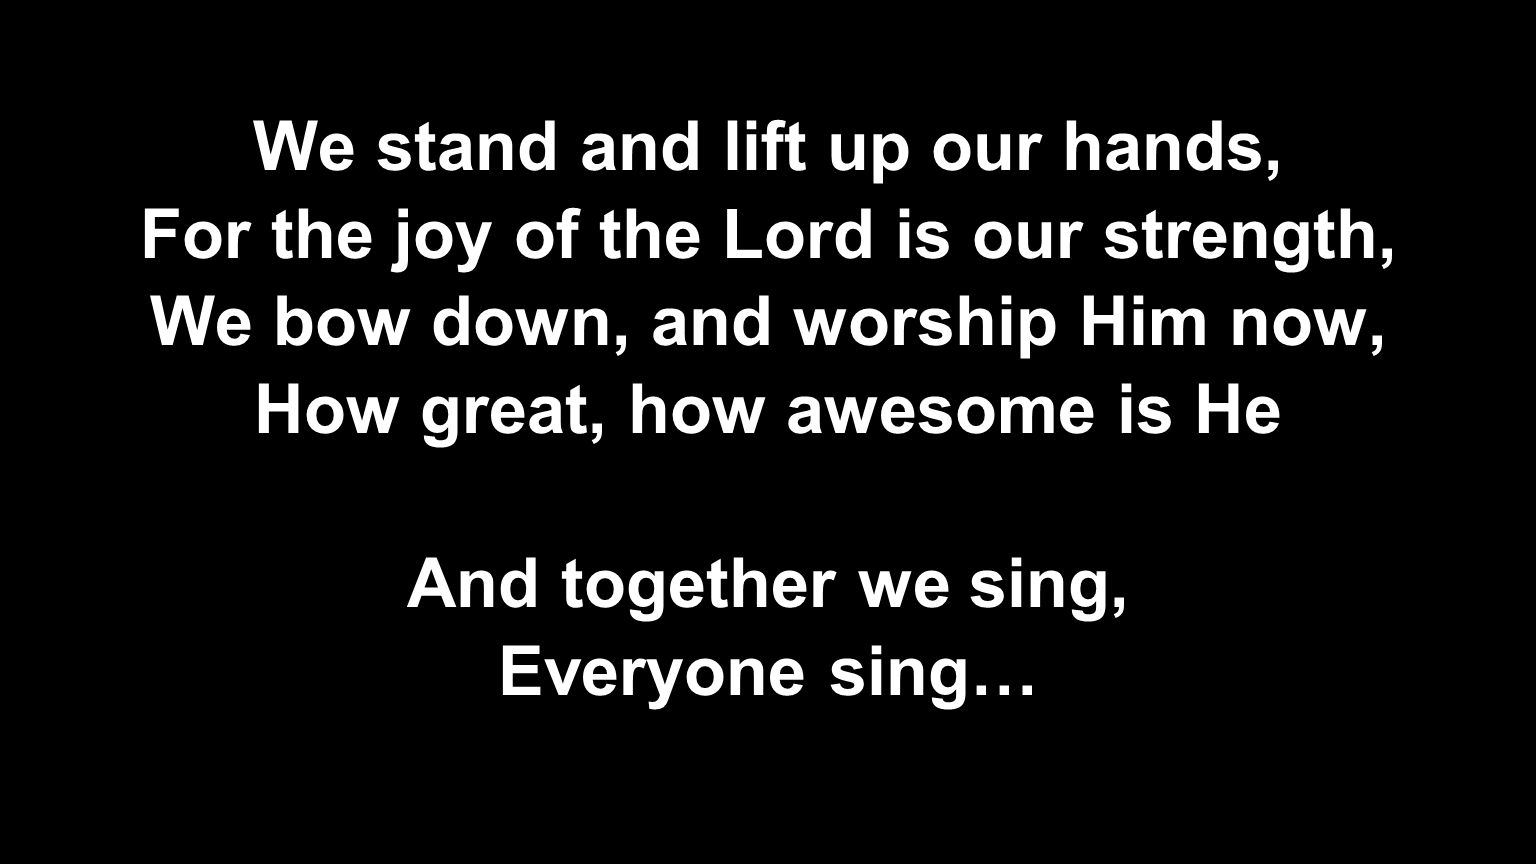 We stand and lift up our hands, For the joy of the Lord is our strength, We bow down, and worship Him now, How great, how awesome is He And together we sing, Everyone sing…